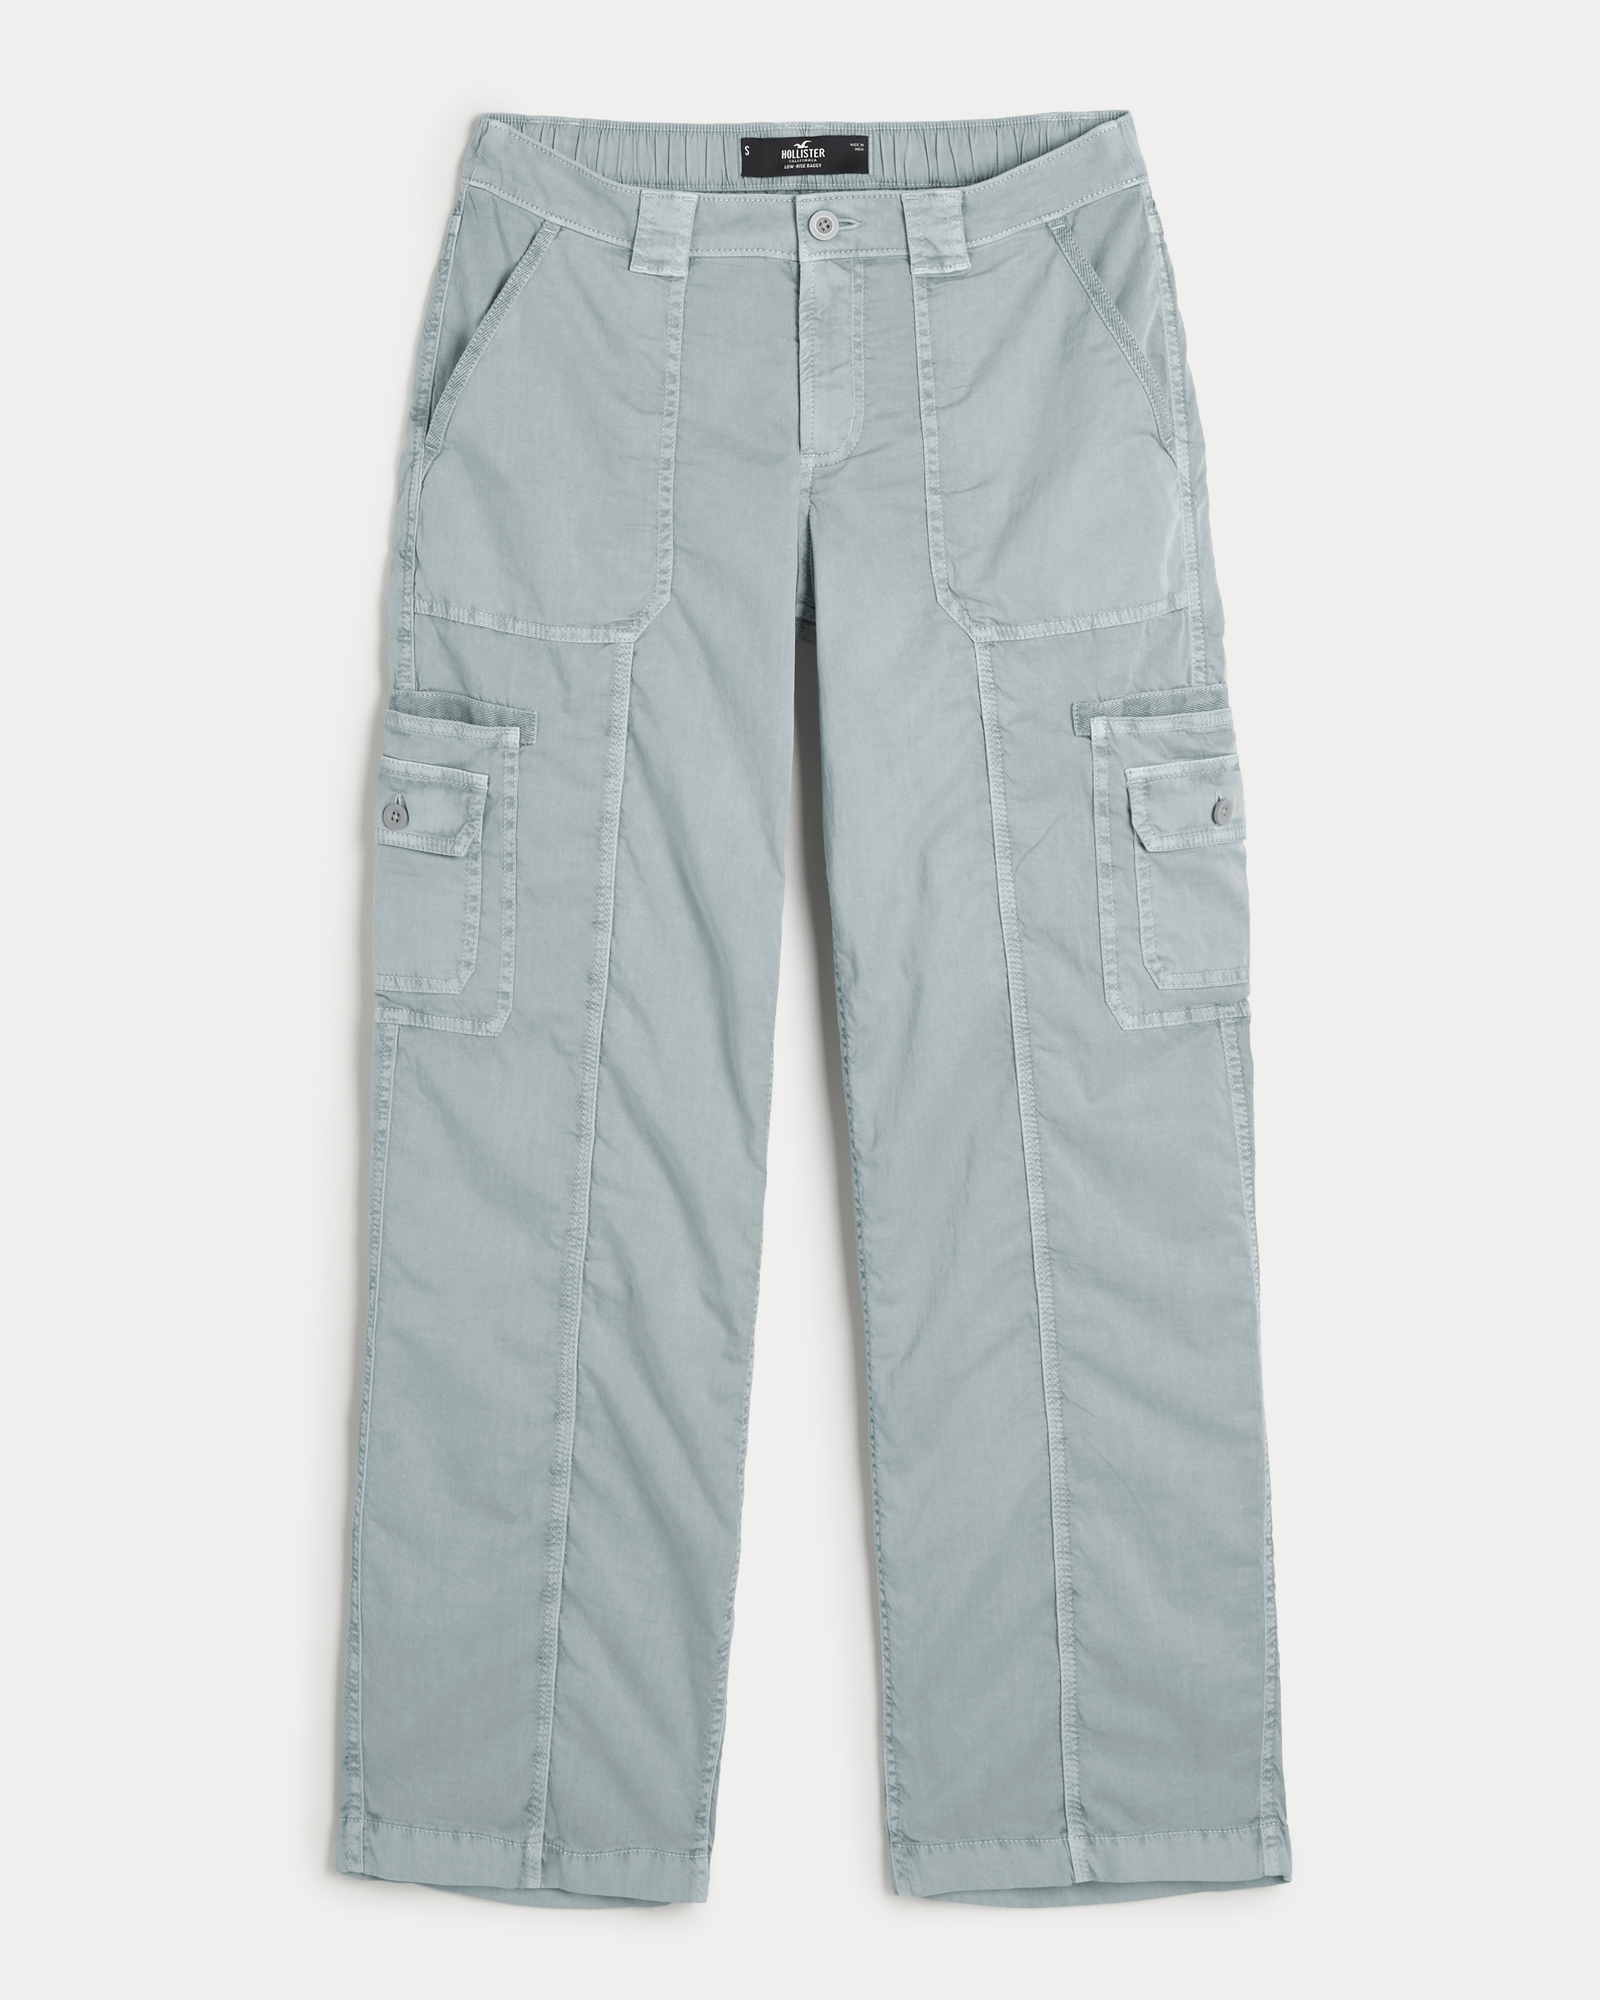 https://img.hollisterco.com/is/image/anf/KIC_356-3089-0035-211_prod1.jpg?policy=product-extra-large